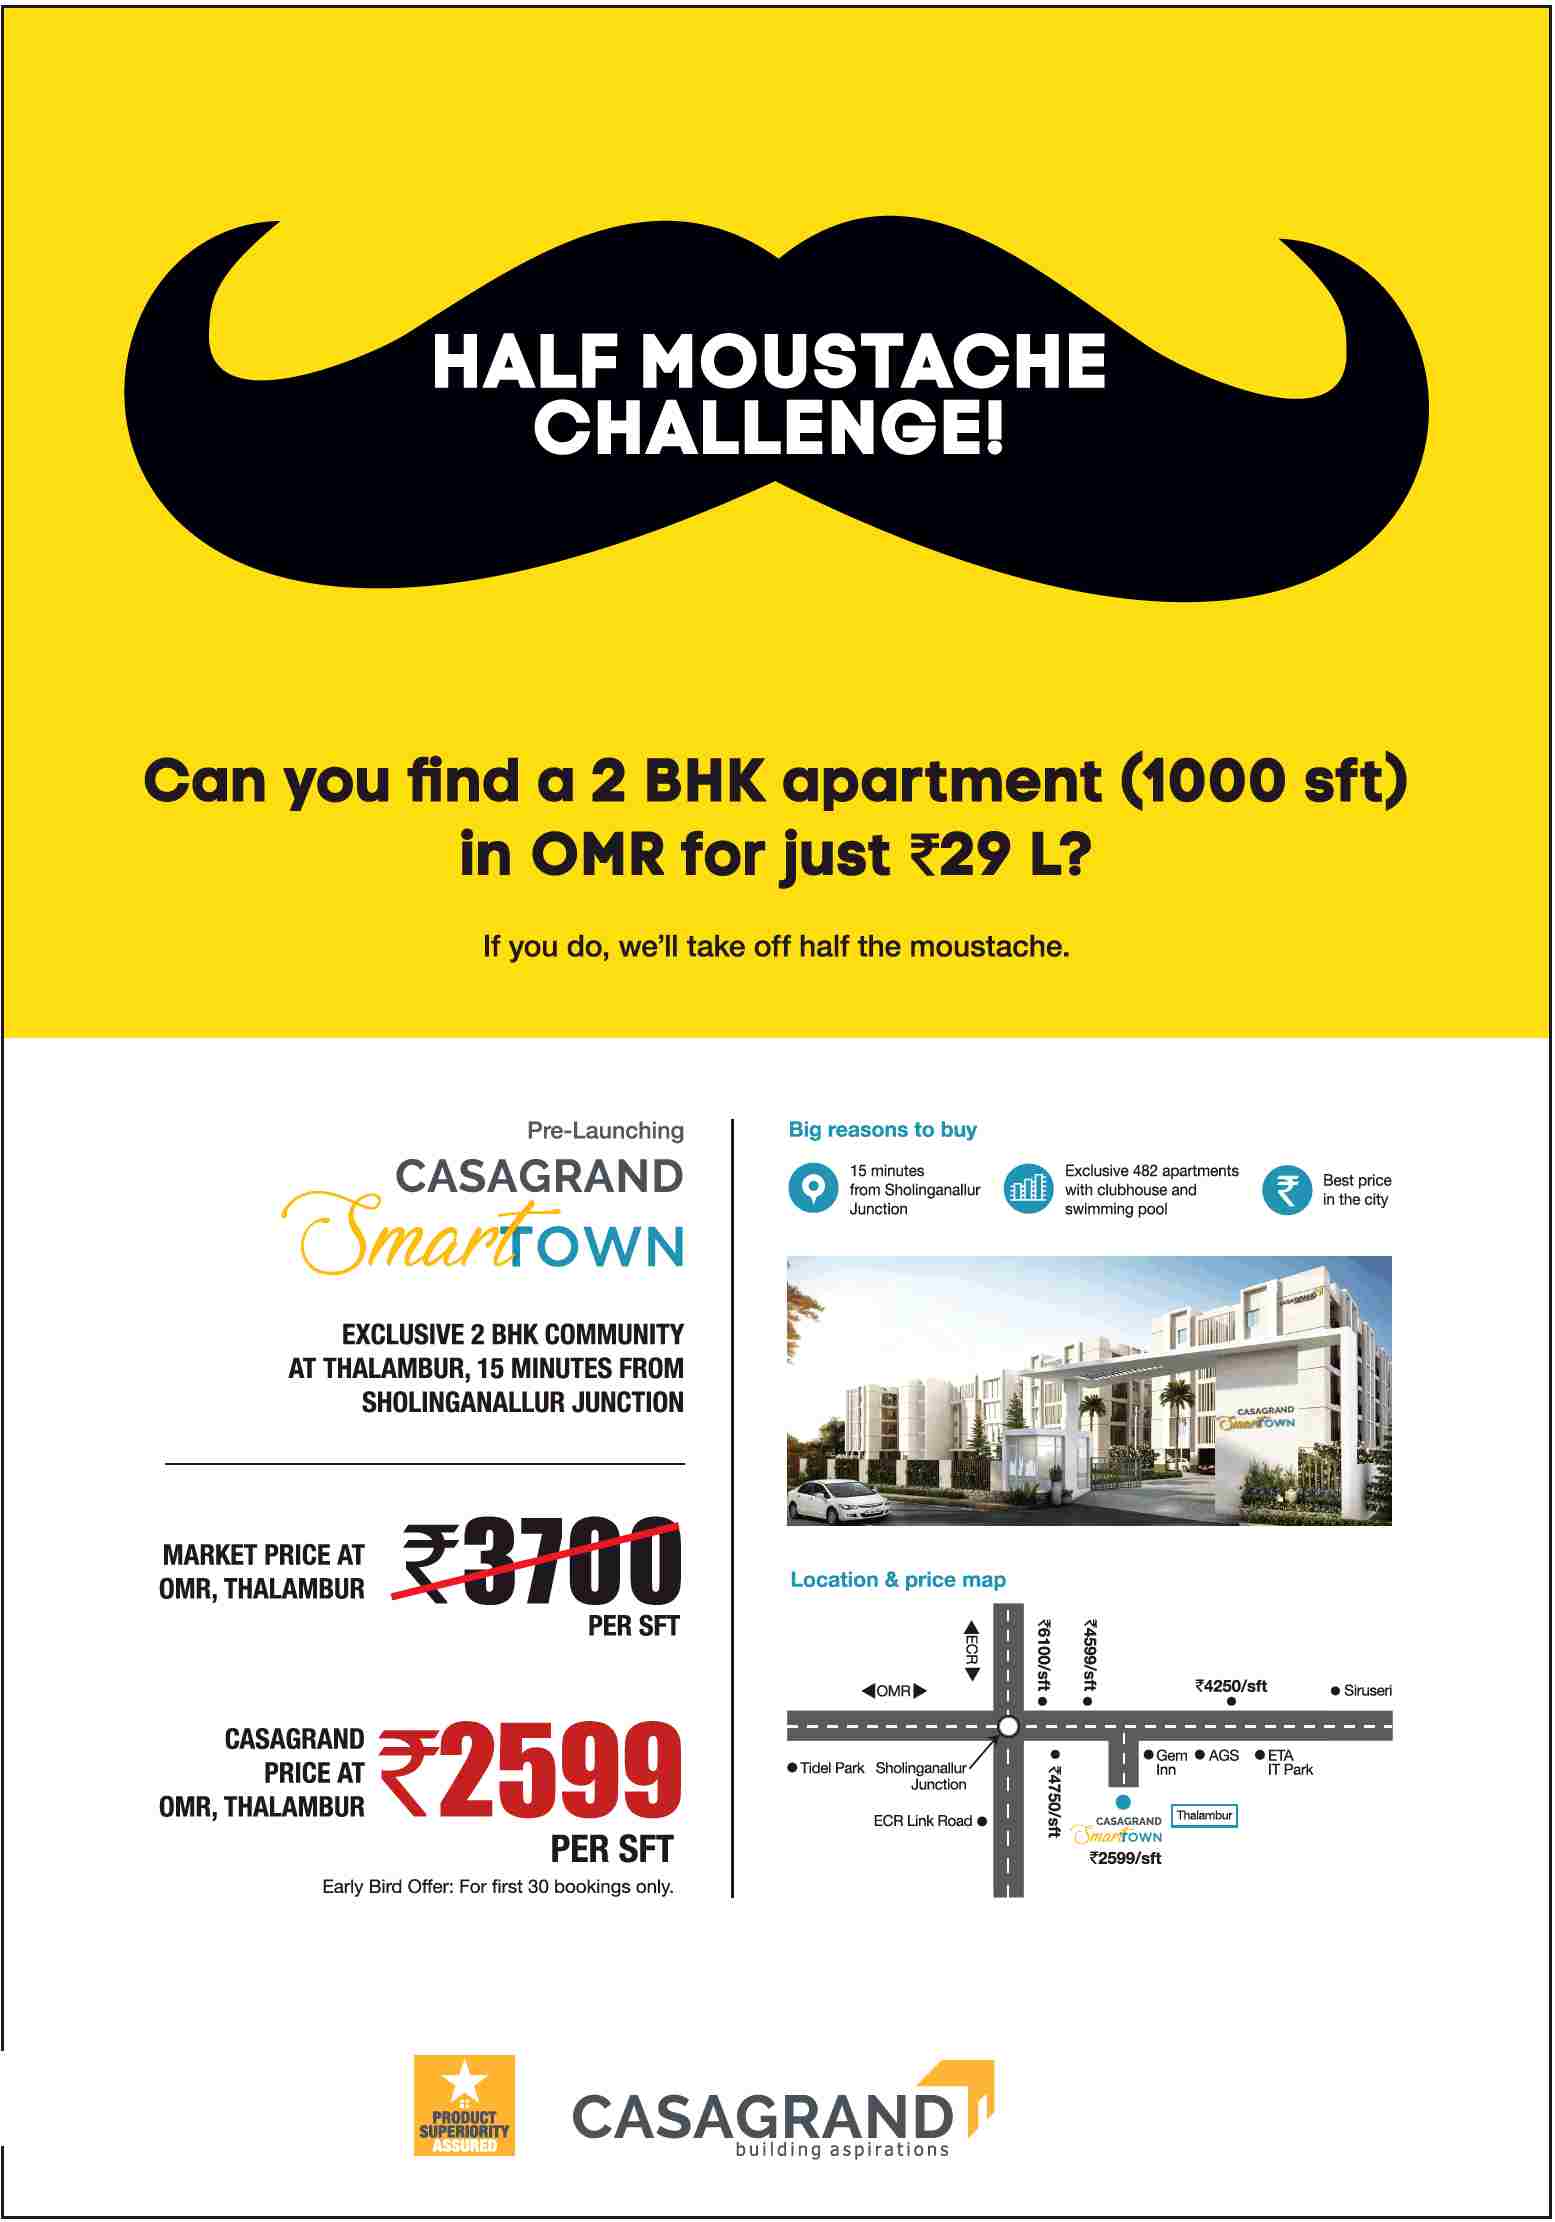 Get 2 BHK Just For Rs 29 Lakhs at Casagrand Smart Town, Chennai Update